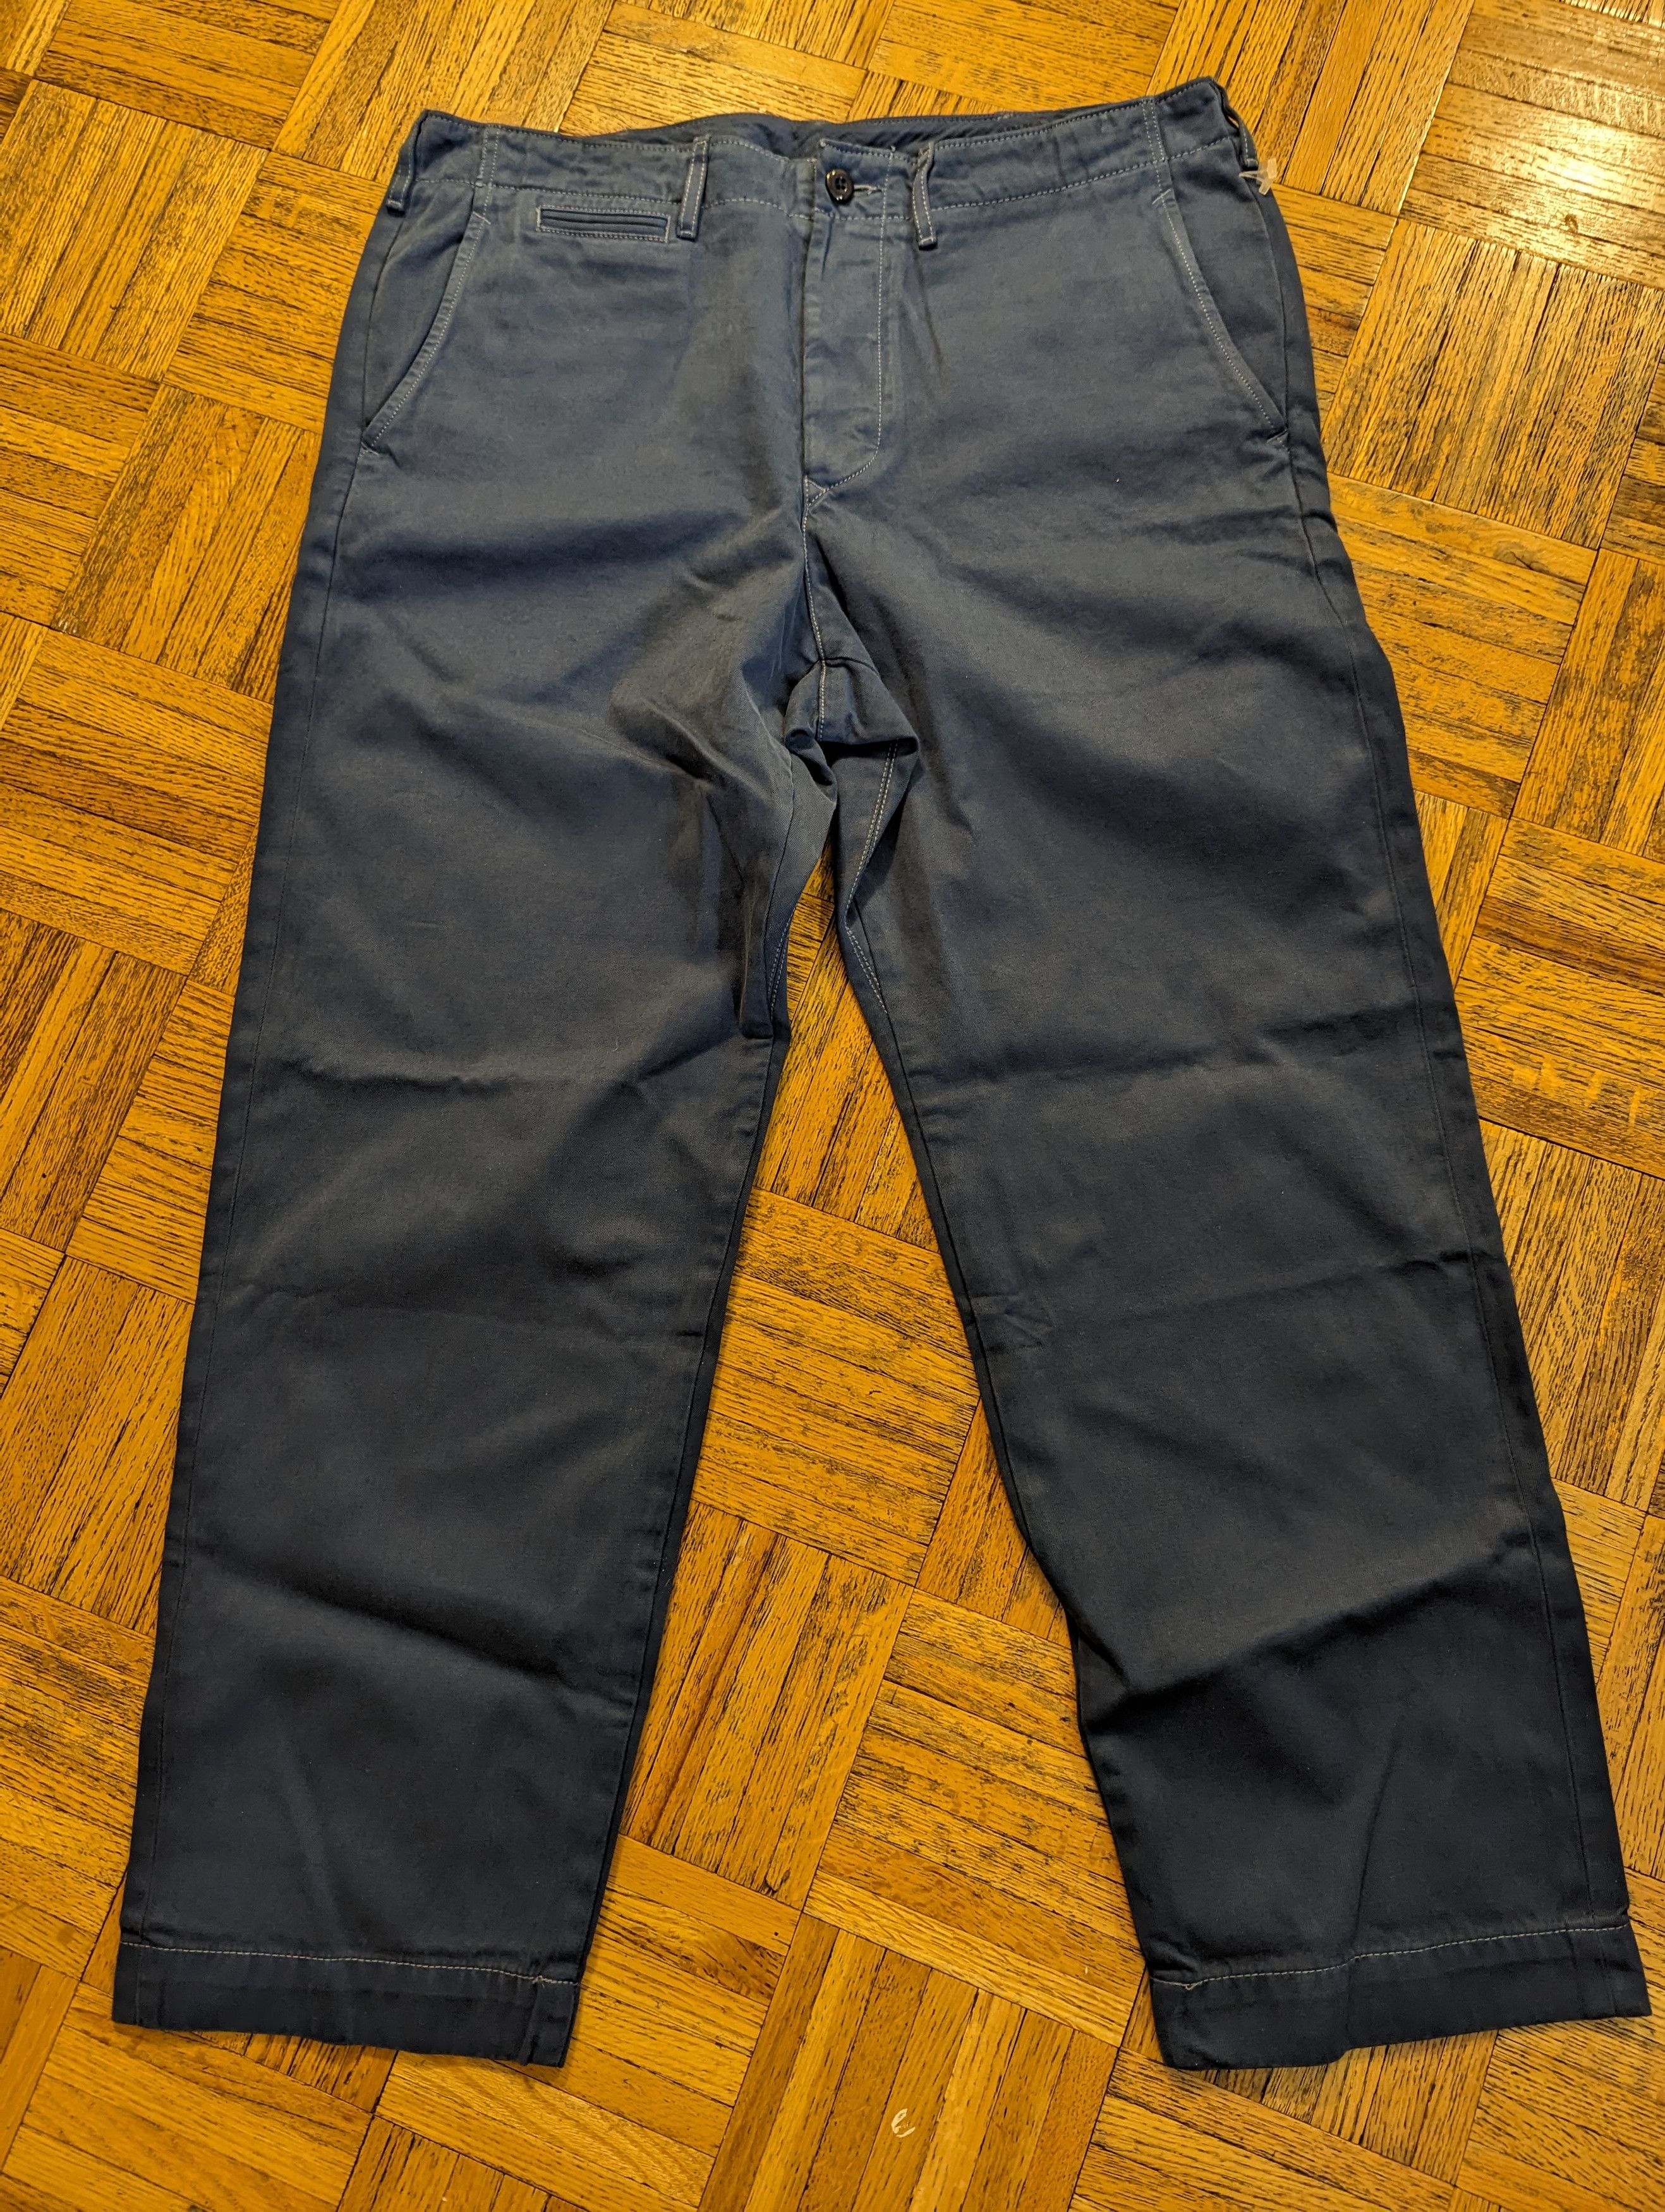 Wallace & Barnes Selvedge Officer's Chinos, new with tags | Grailed